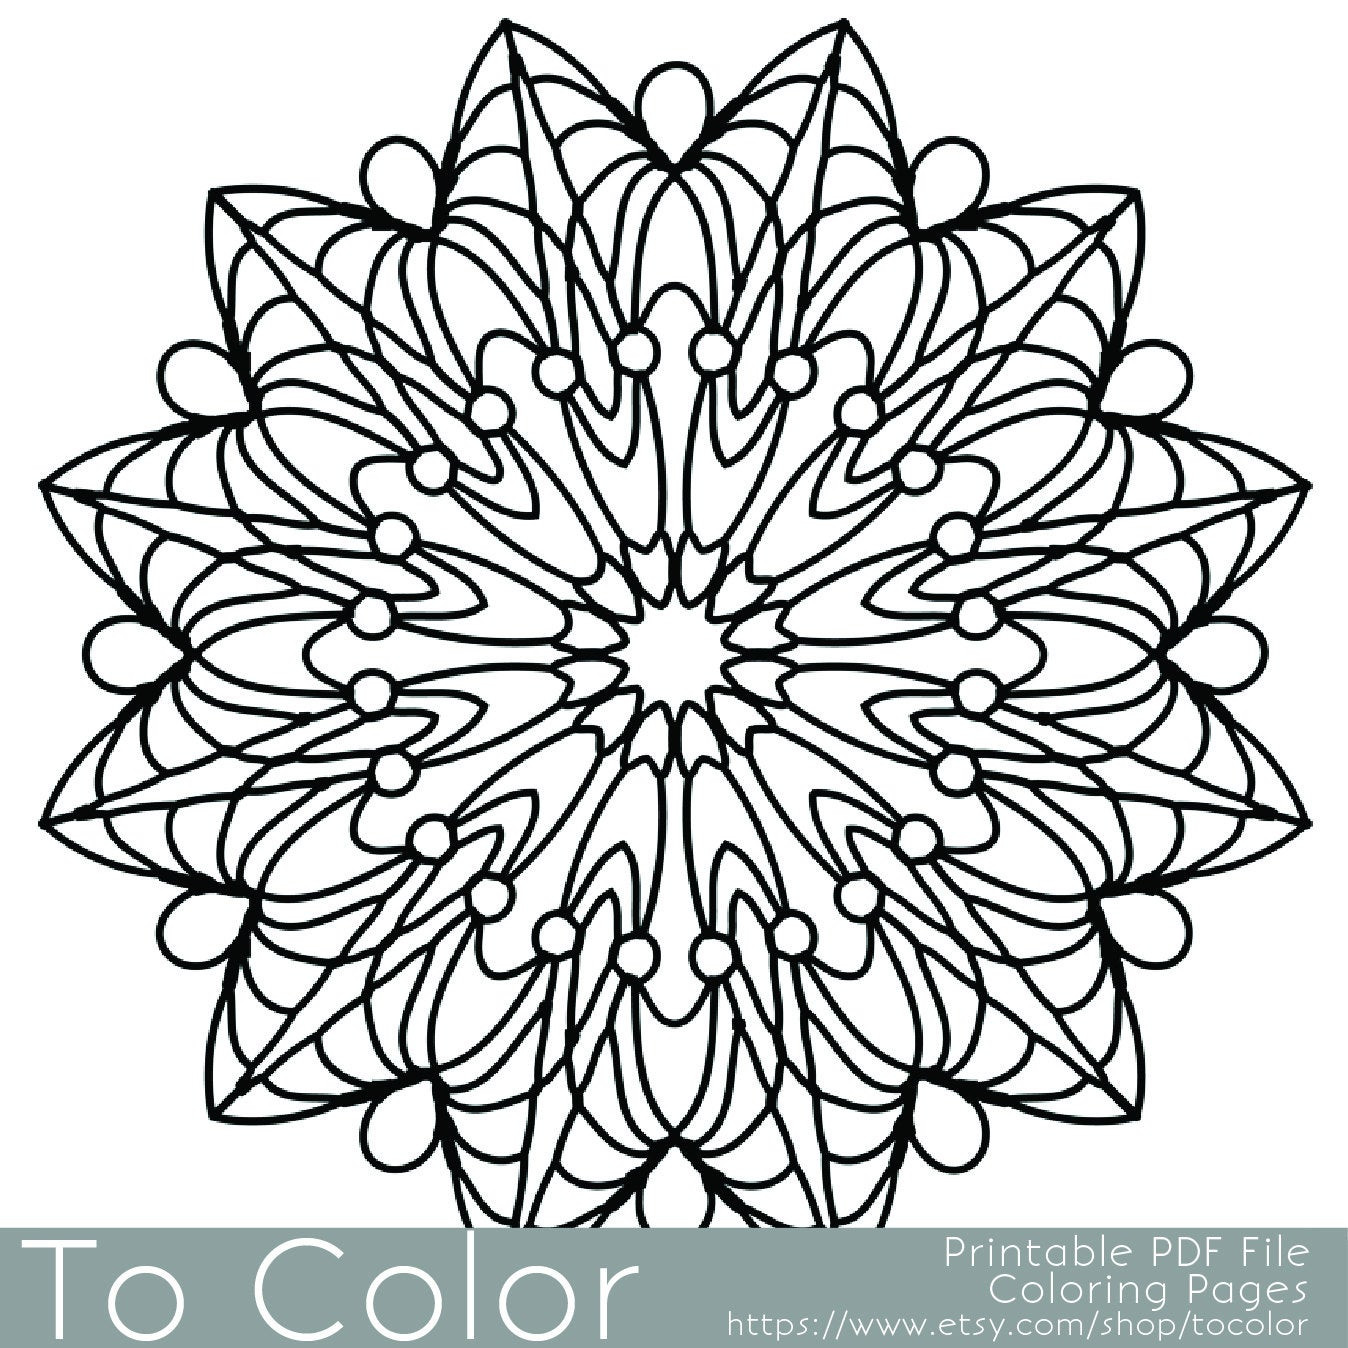 Printable Free Coloring Pages For Adults
 Simple Printable Coloring Pages for Adults Gel Pens Mandala